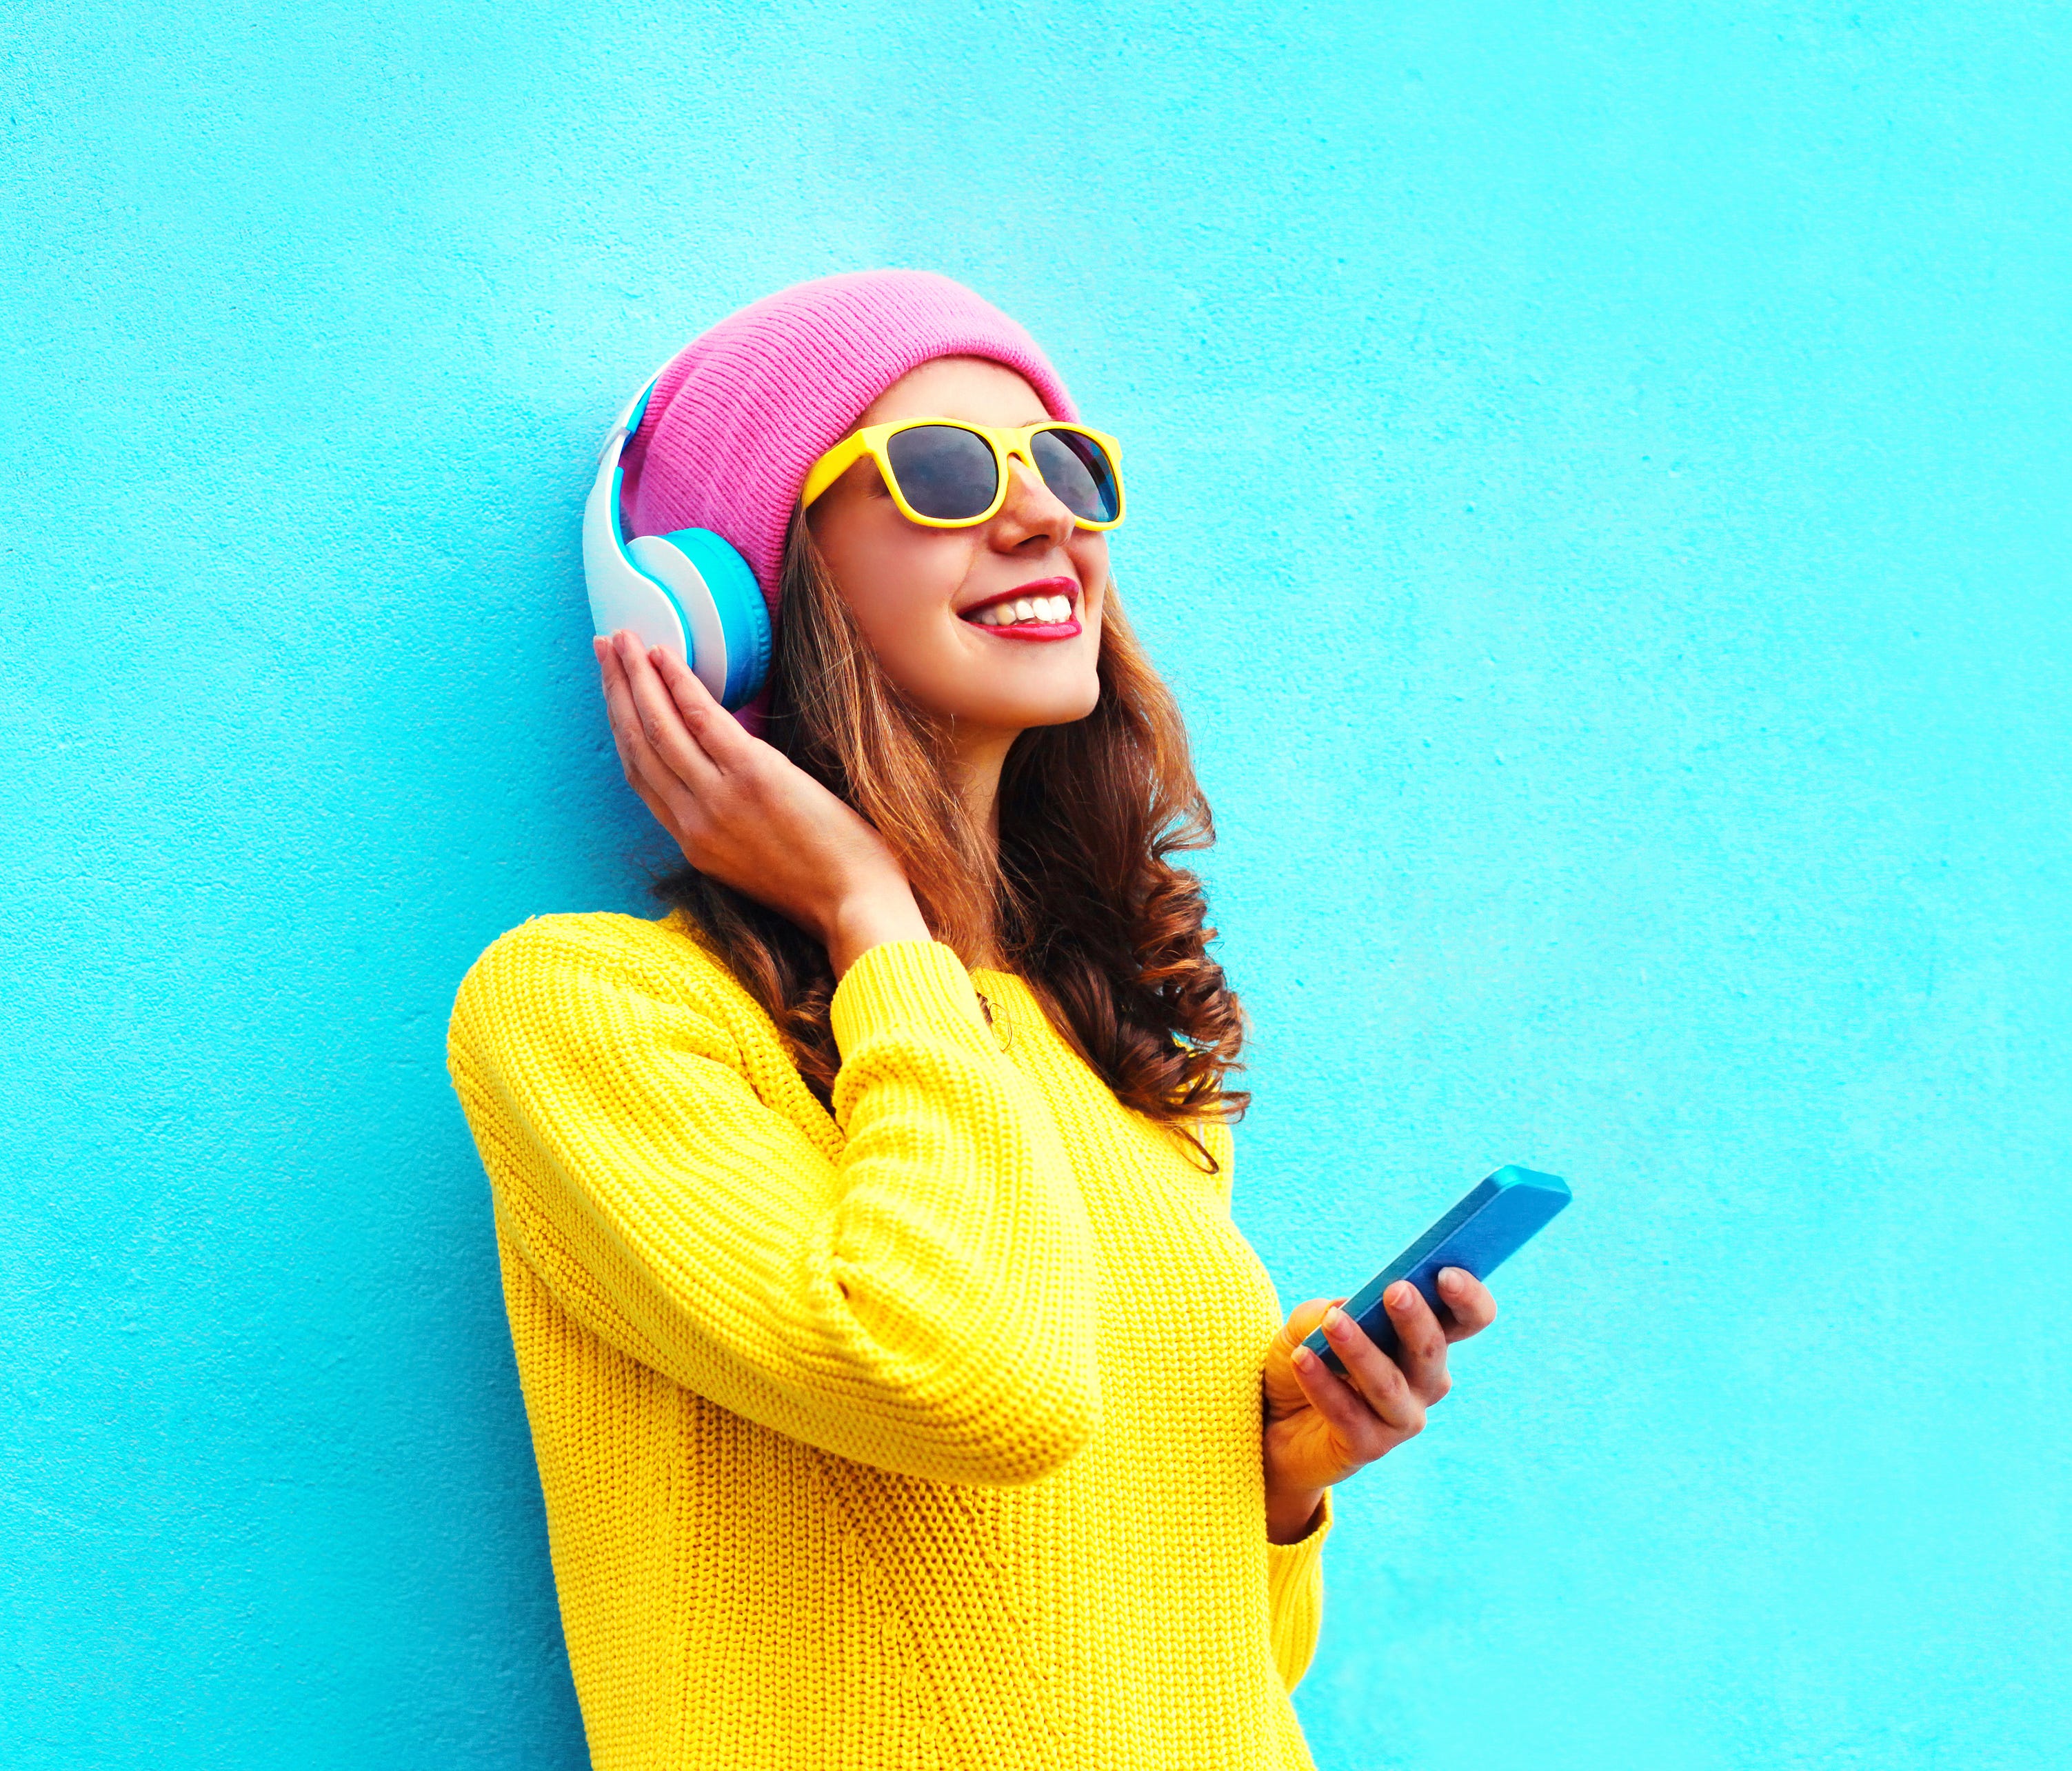 Fashion pretty sweet carefree girl listening to music in headphones with smartphone wearing a colorful pink hat yellow sunglasses sweater over blue background